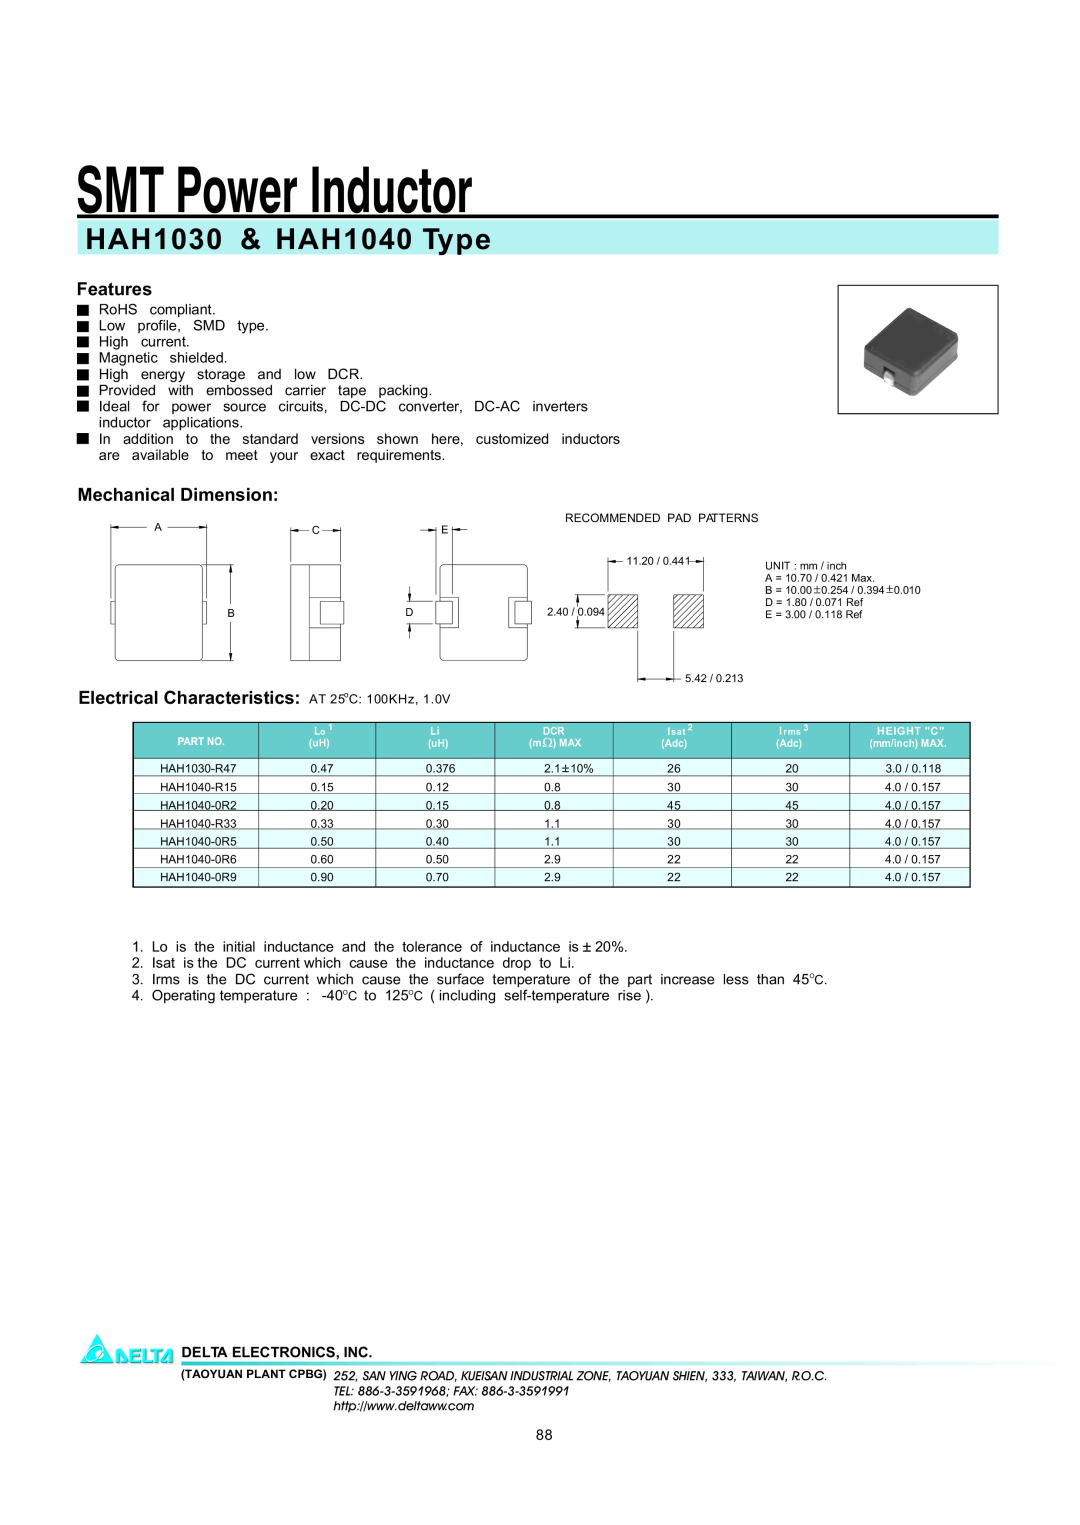 Delta Electronics manual SMT Power Inductor, HAH1030 & HAH1040 Type, Features, Mechanical Dimension 